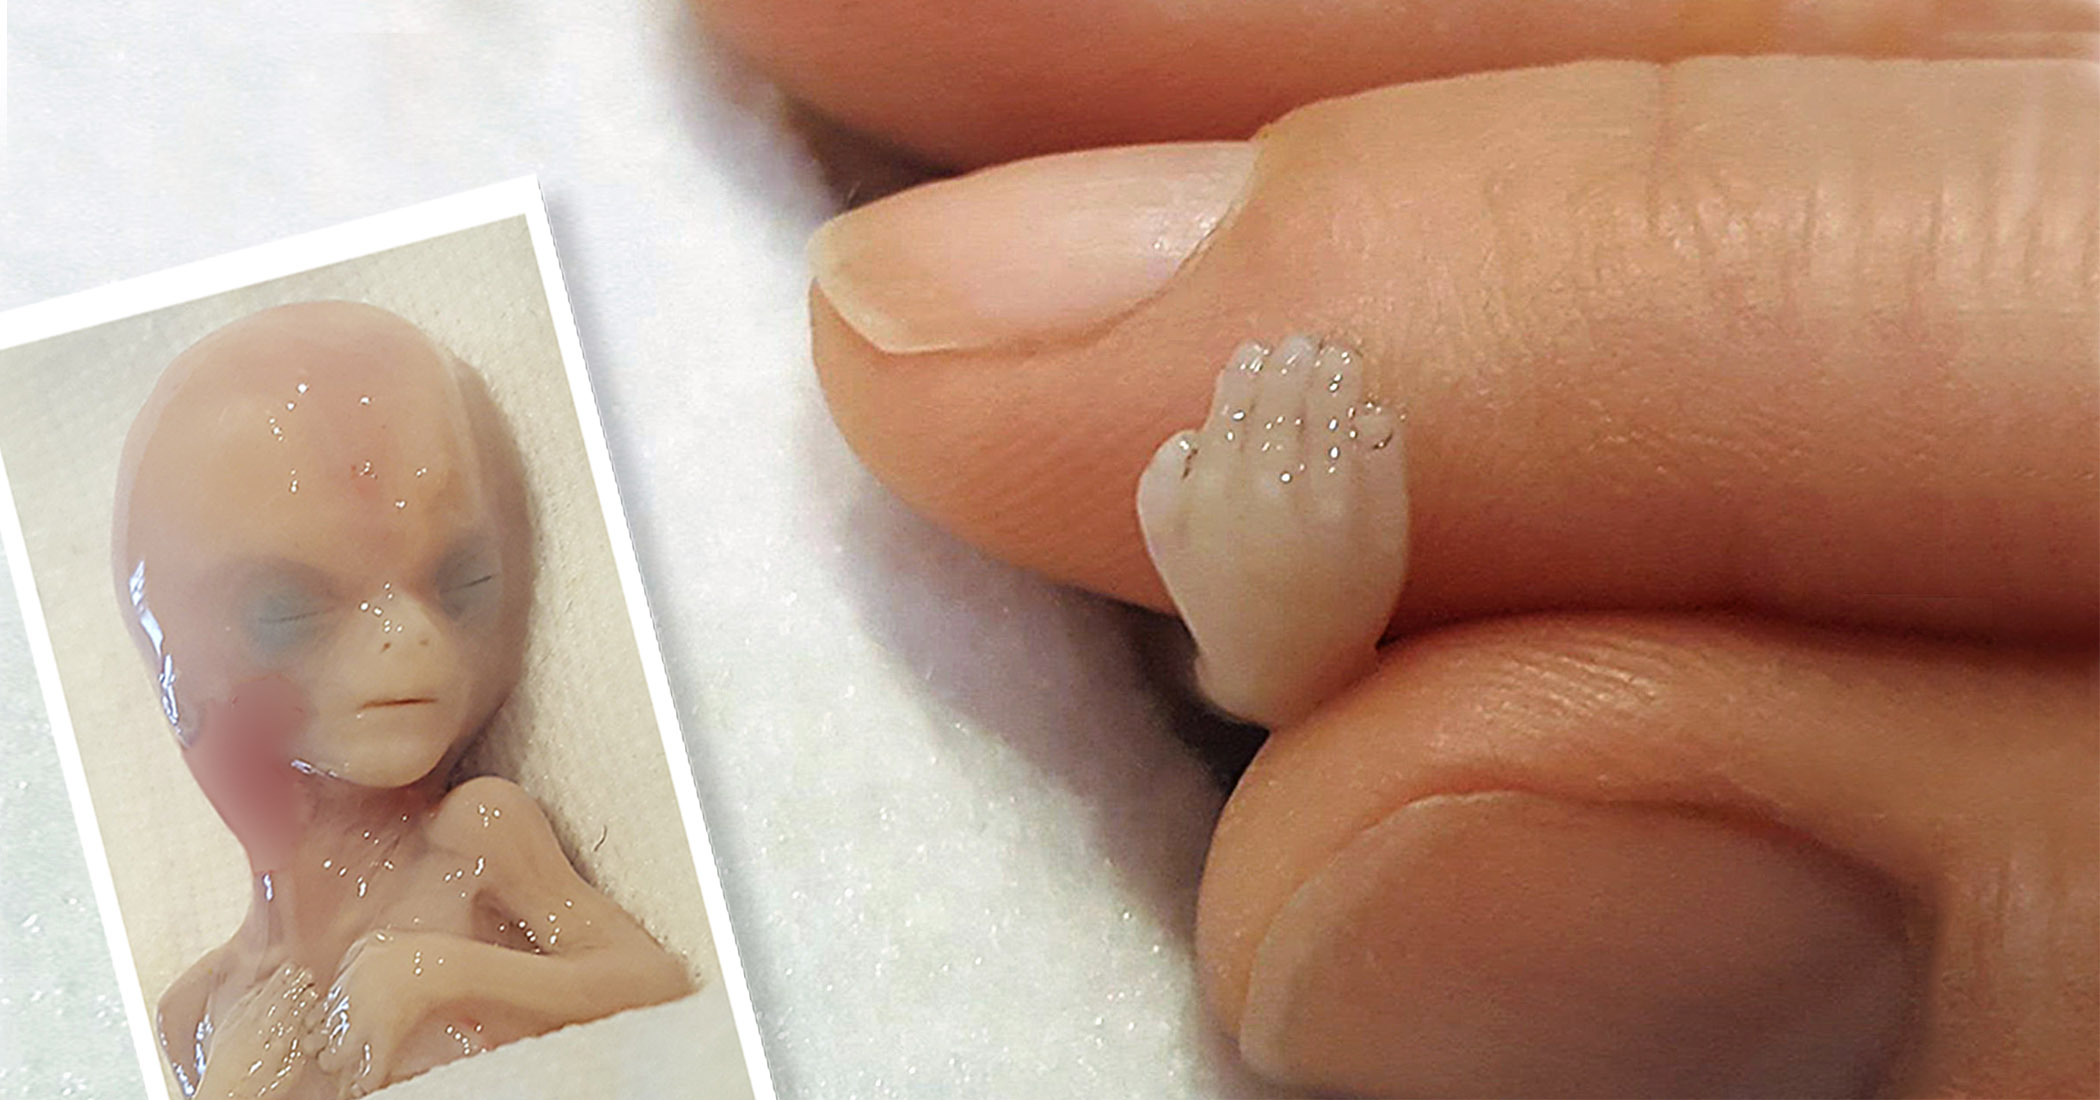 photos-of-perfectly-formed-14-week-miscarried-baby-are-saving-lives